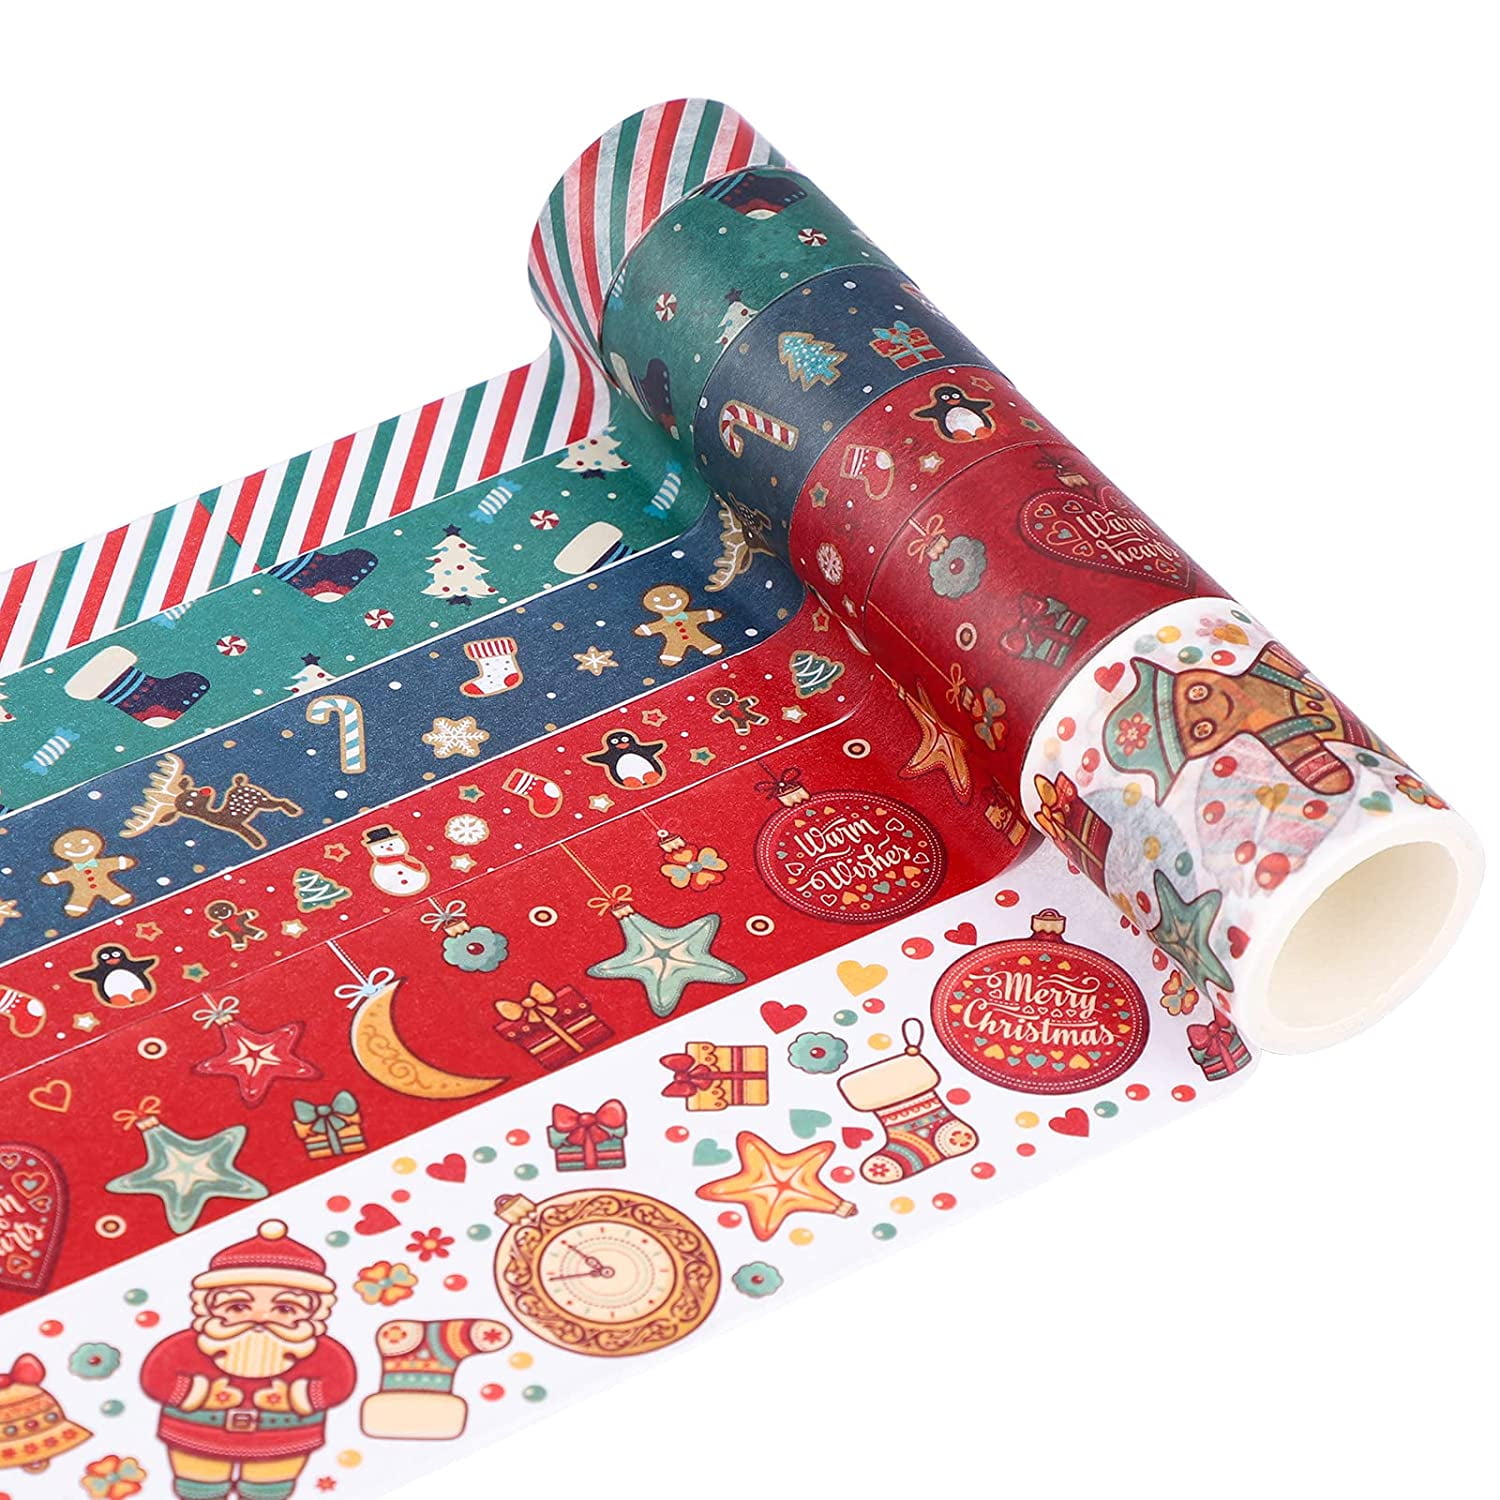 Snowflakes Washi Tape,Winter Washi Tape,Christmas Washi Tape,Washi Tape  Clip Art,Digital Washi Tape,Planner Stickers